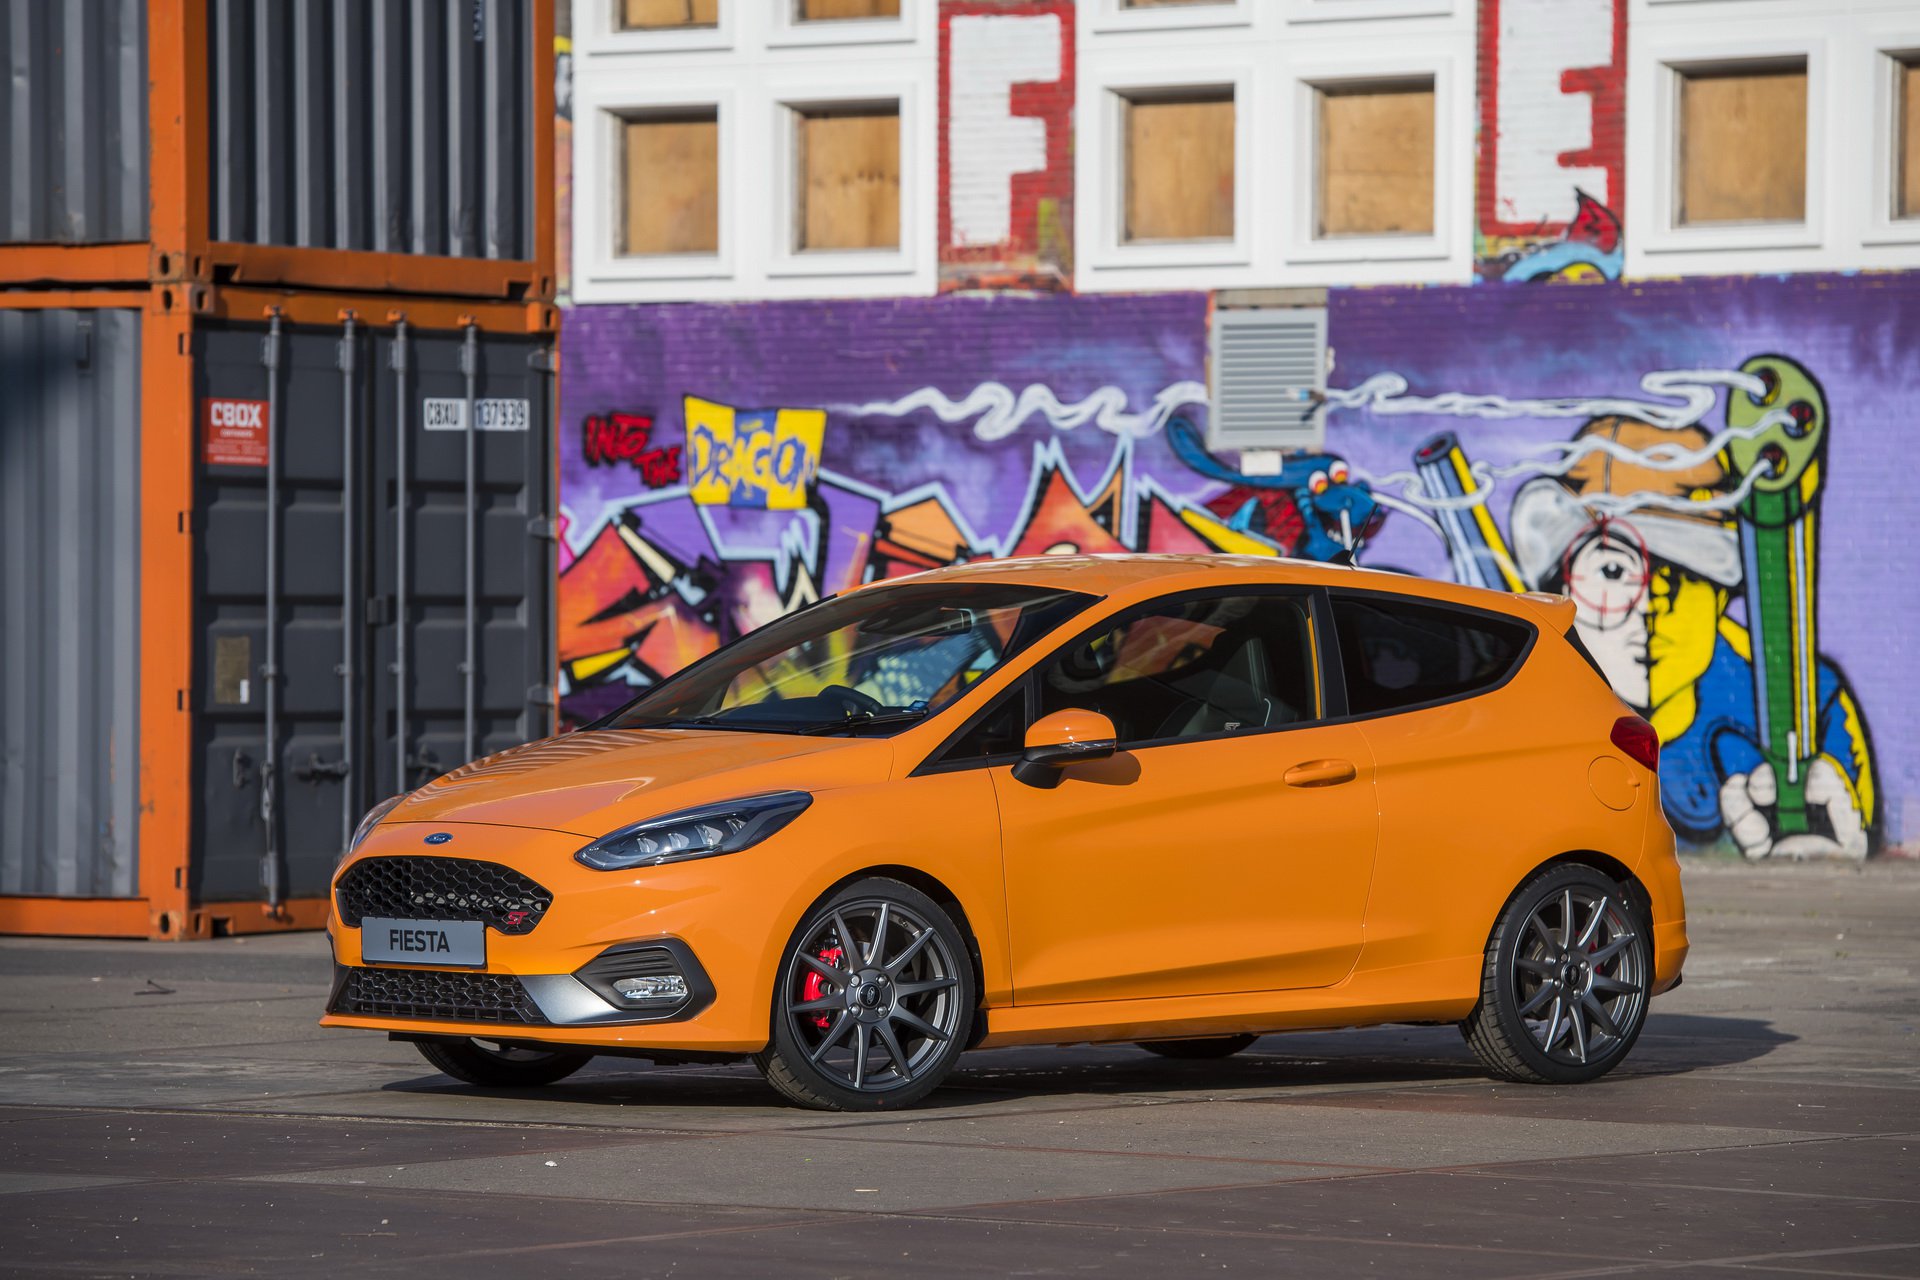 https://s1.cdn.autoevolution.com/images/news/ford-fiesta-st-performance-edition-is-limited-to-600-units-133638_1.jpg